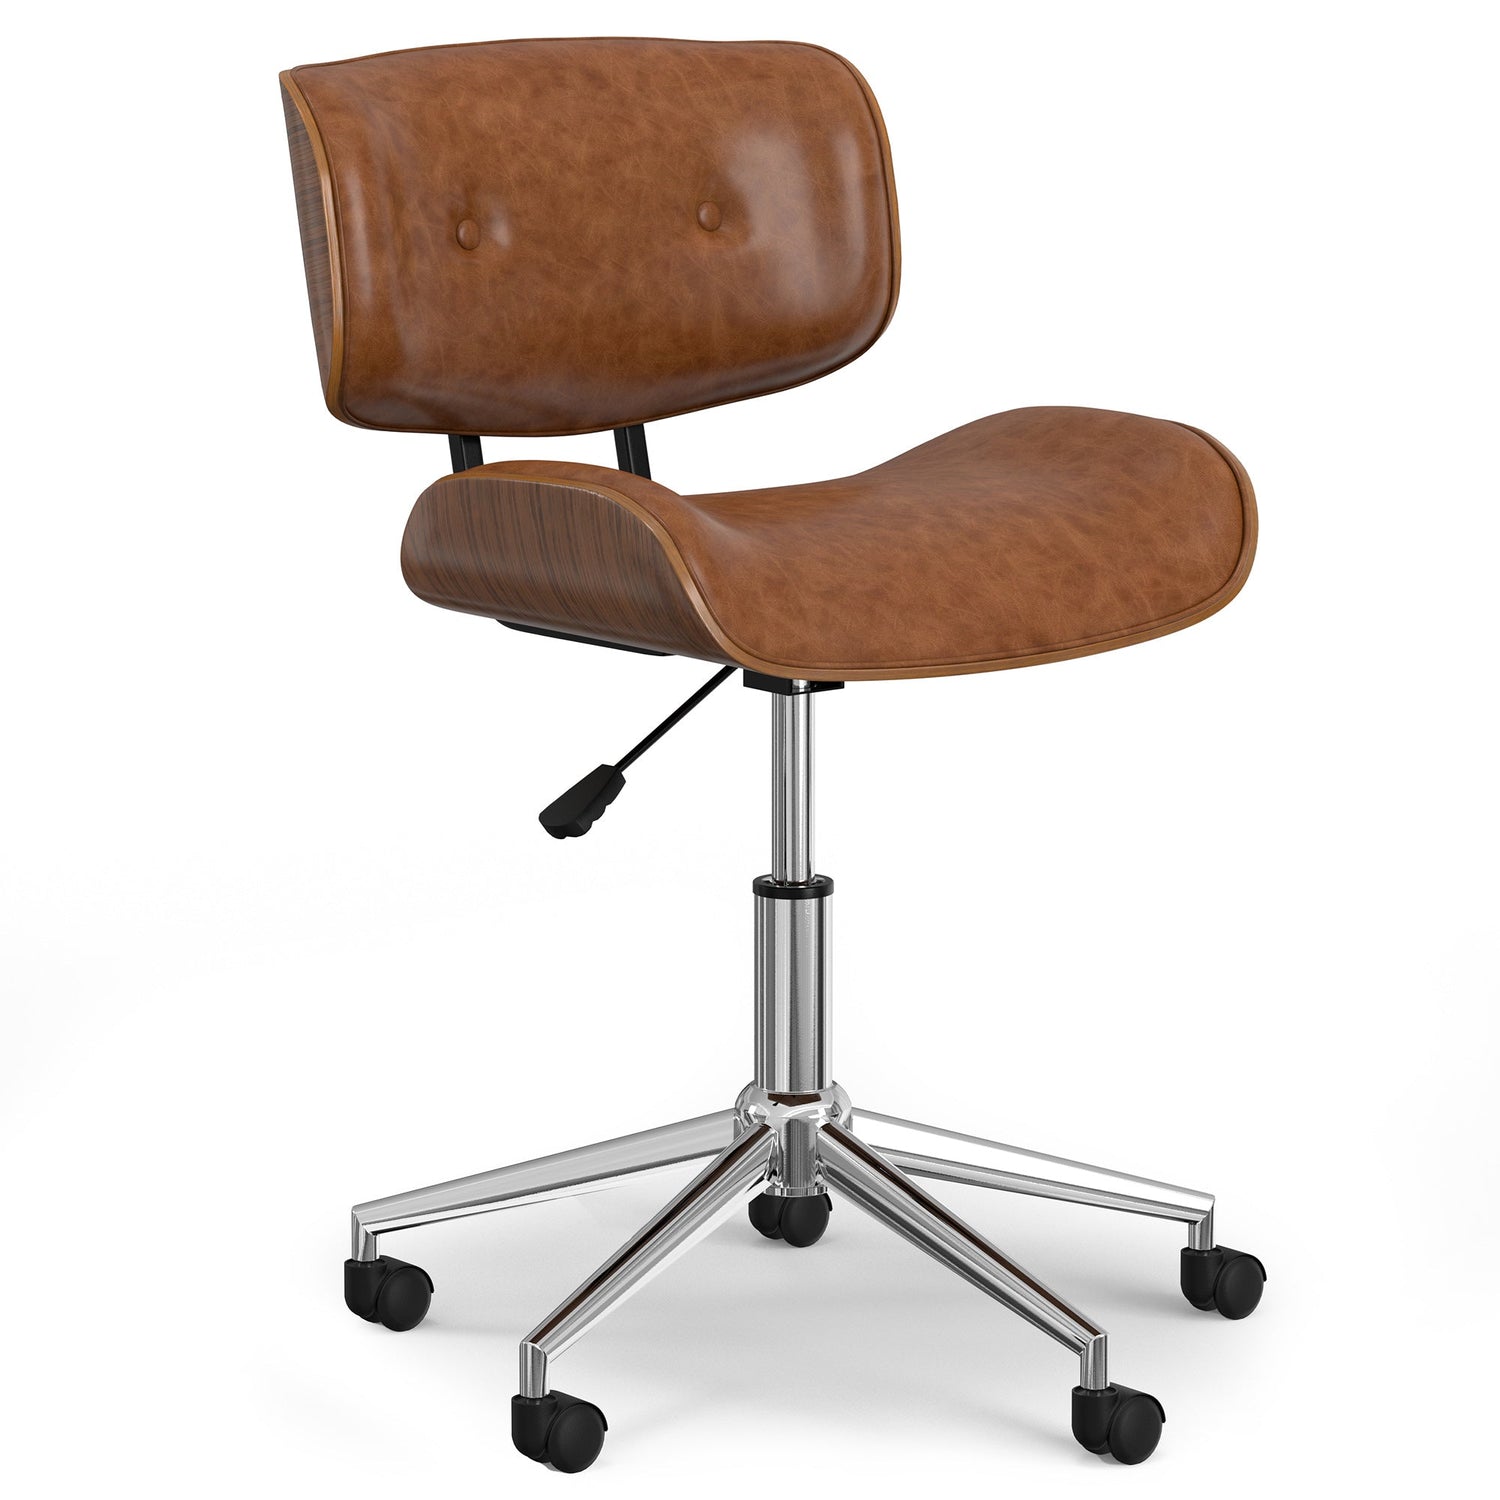 Distressed Tan Distressed Vegan Leather | Dax Bentwood Office Chair